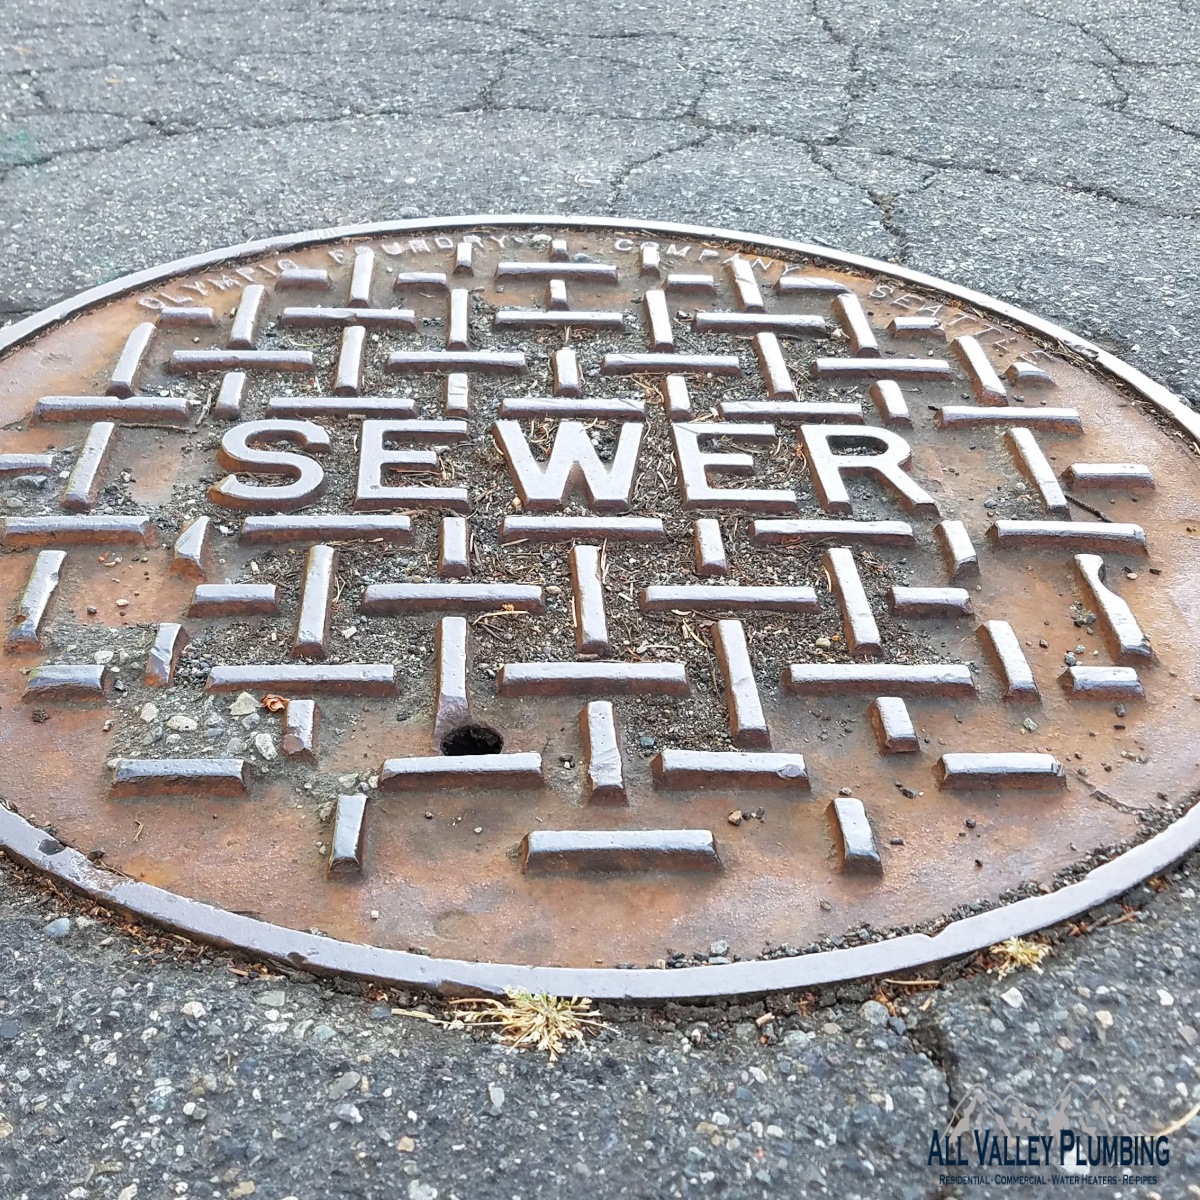 Do You Have A Blockage Or Backup? Call Us For Arlington Sewer Pipe Repair!